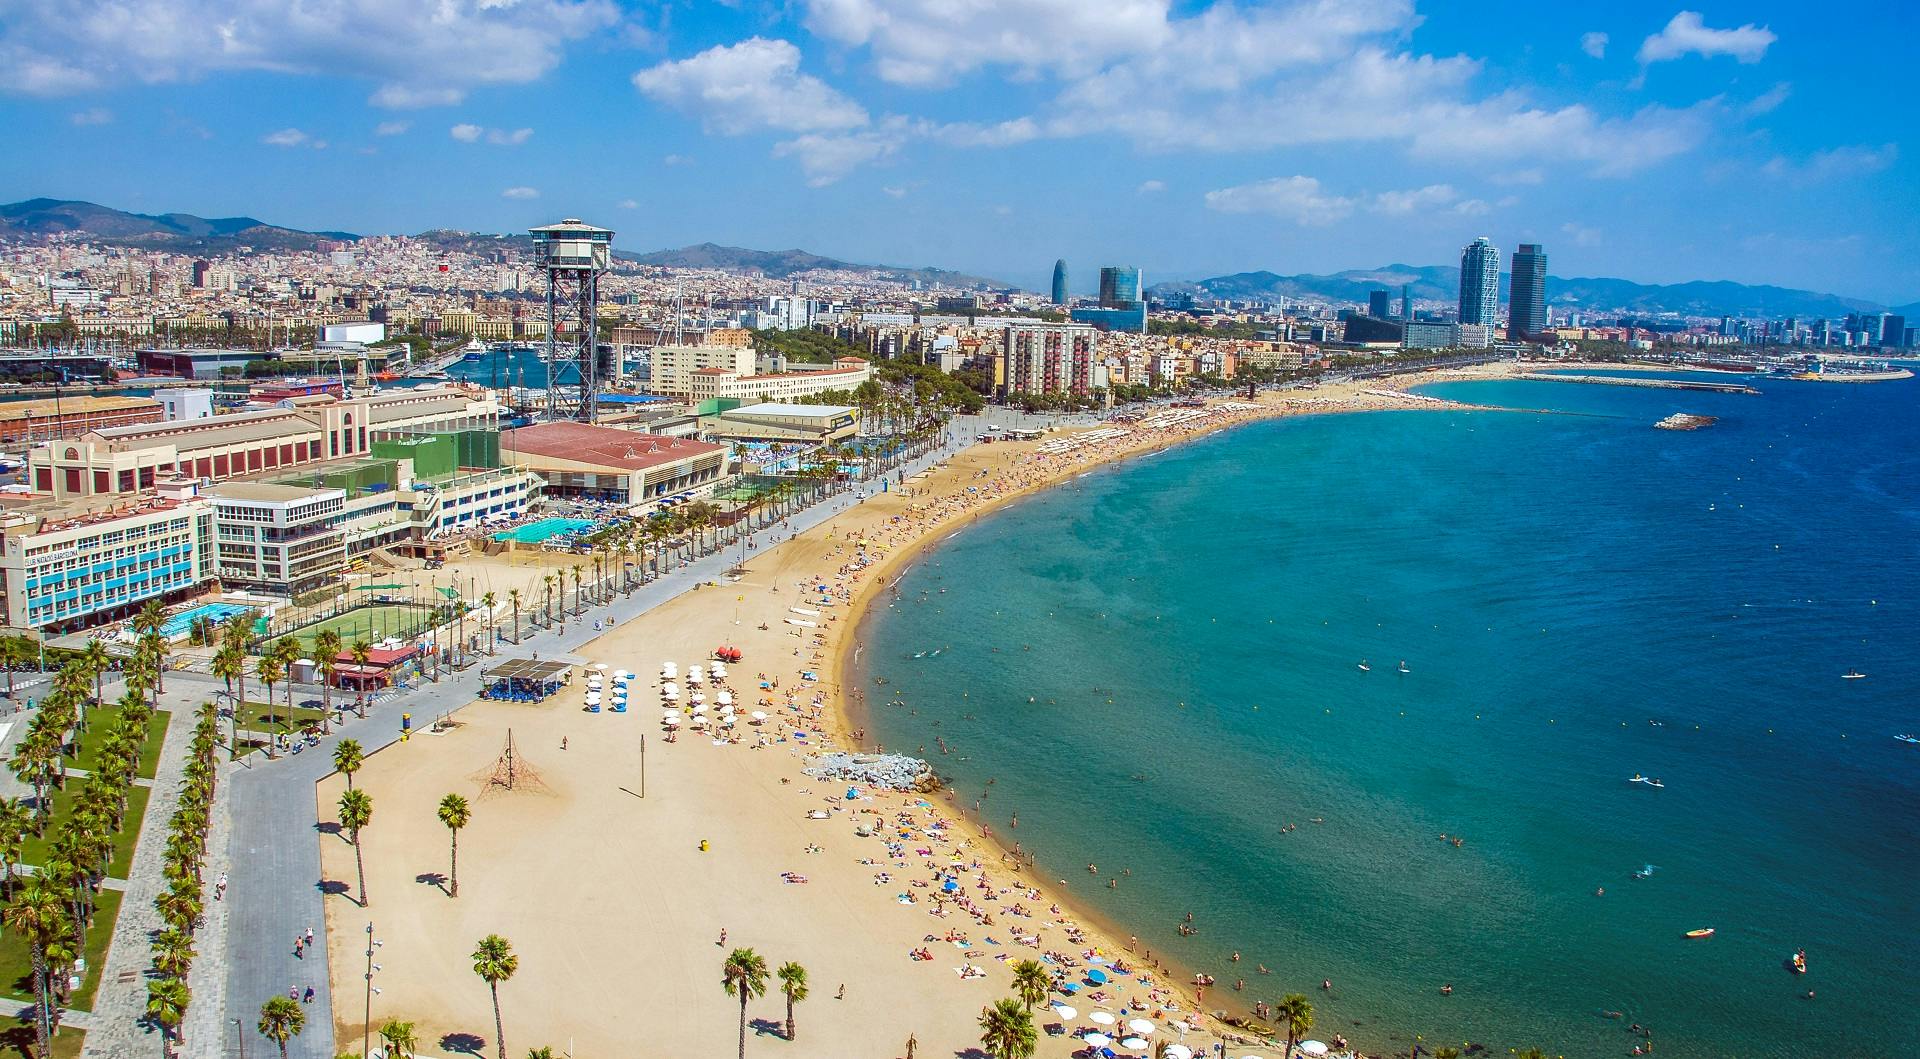 Barcelona and the sea guided tour